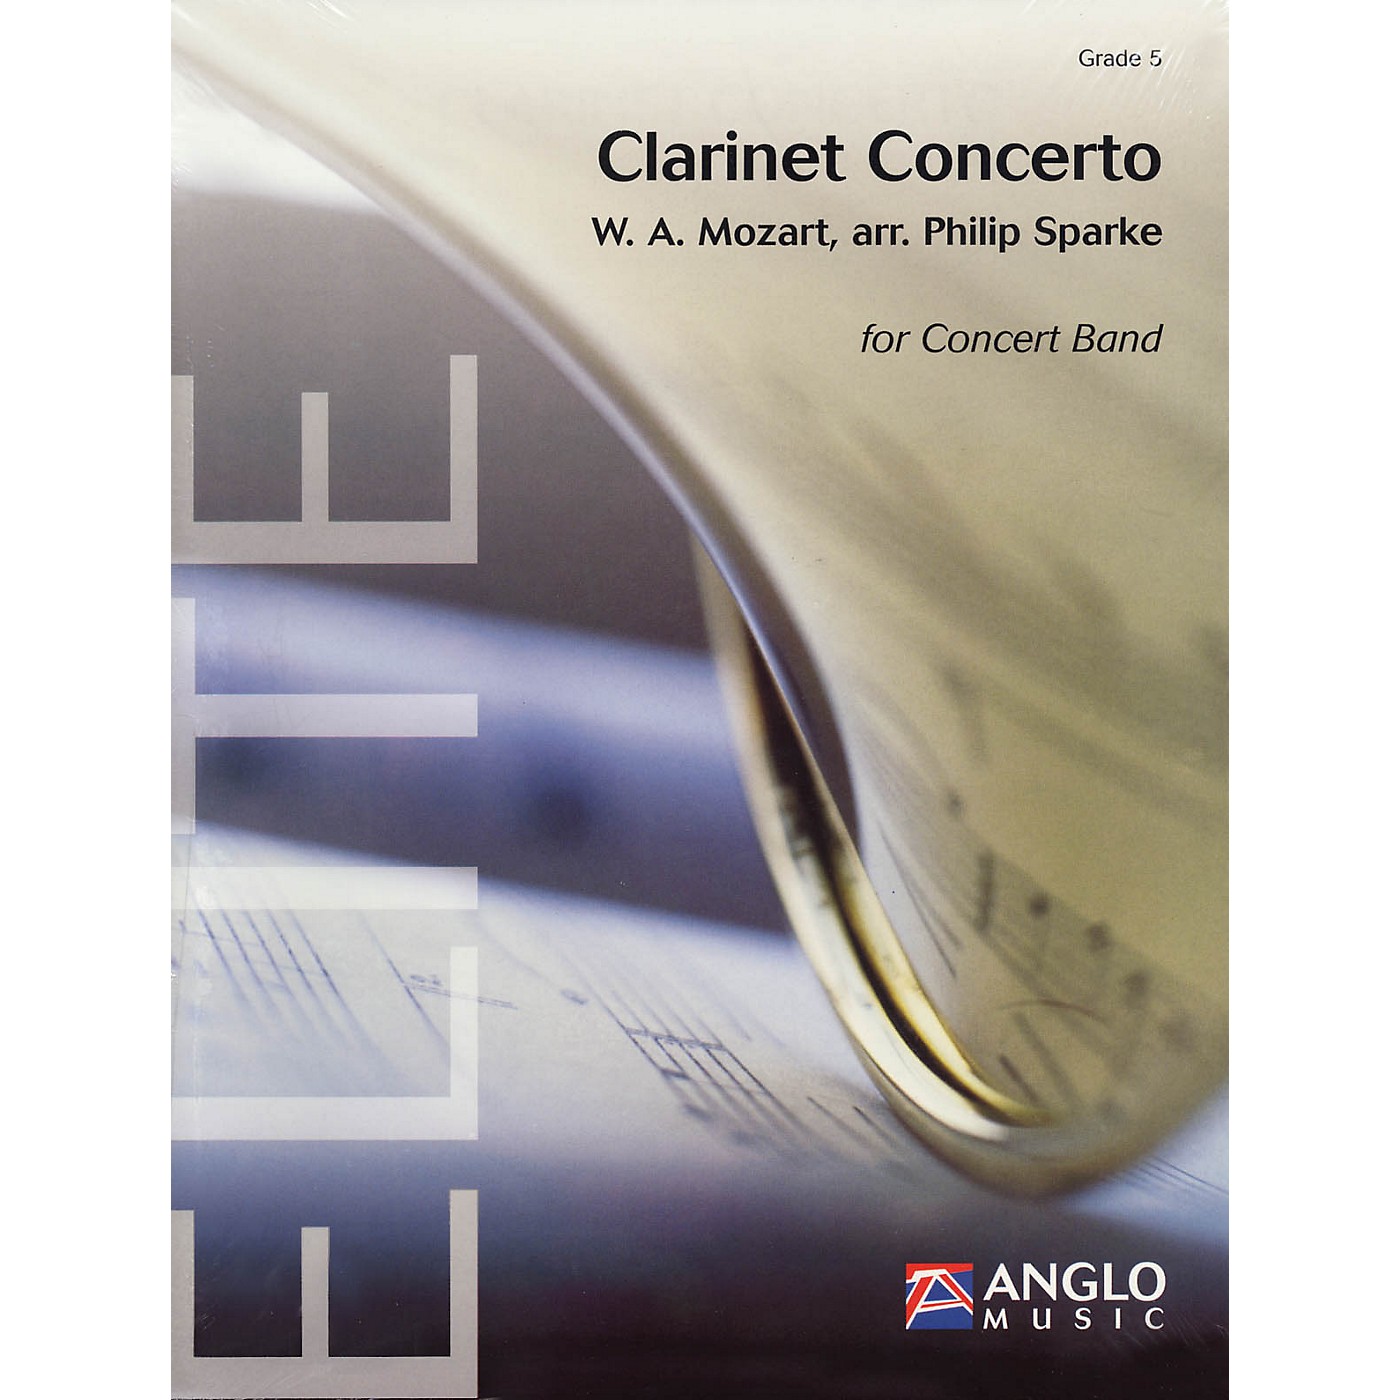 Anglo Music Press Clarinet Concerto (Grade 5 - Score Only) Concert Band Level 5 Arranged by Philip Sparke thumbnail